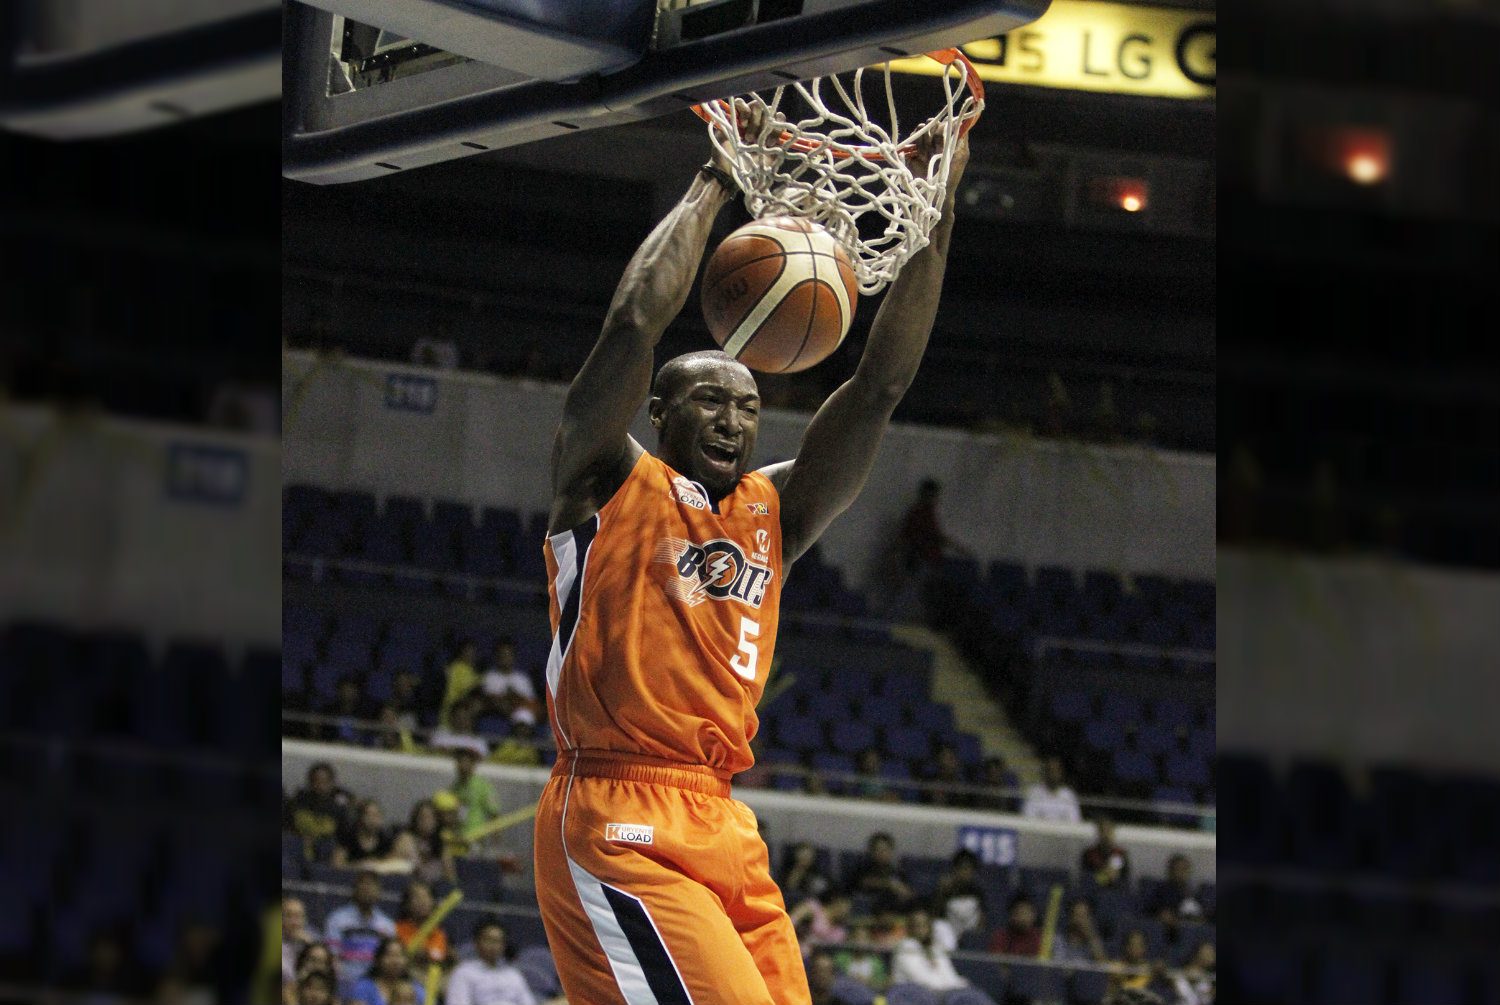 Meralco prevails in TNT shootout, moves a win away from Finals